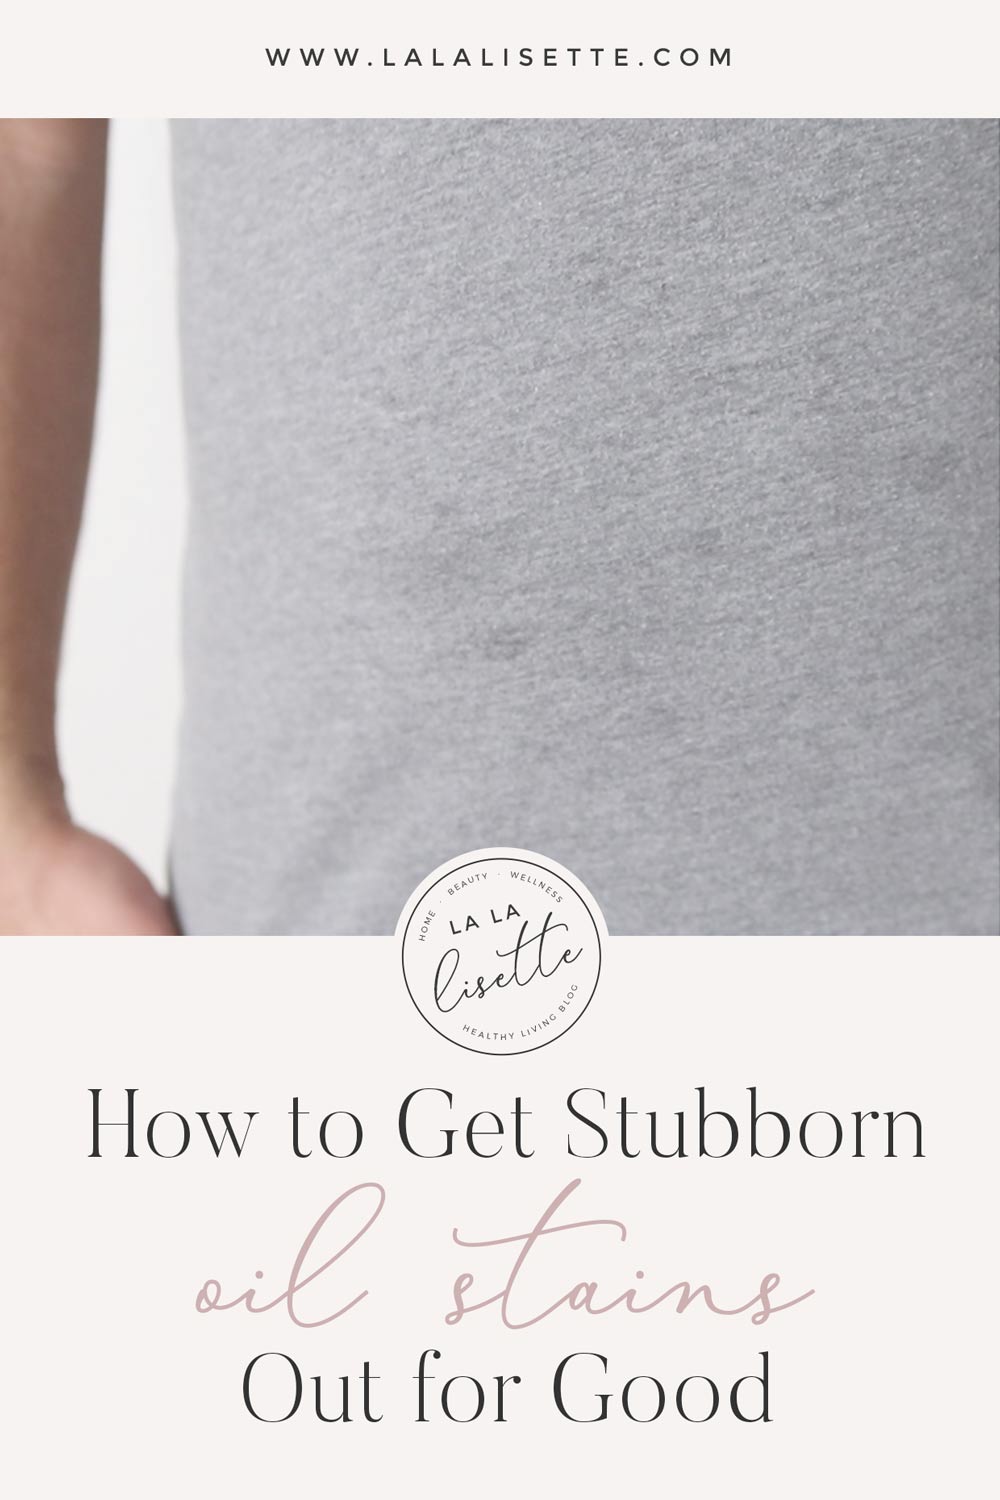 graphic with text: how to get stubborn oil stains for good